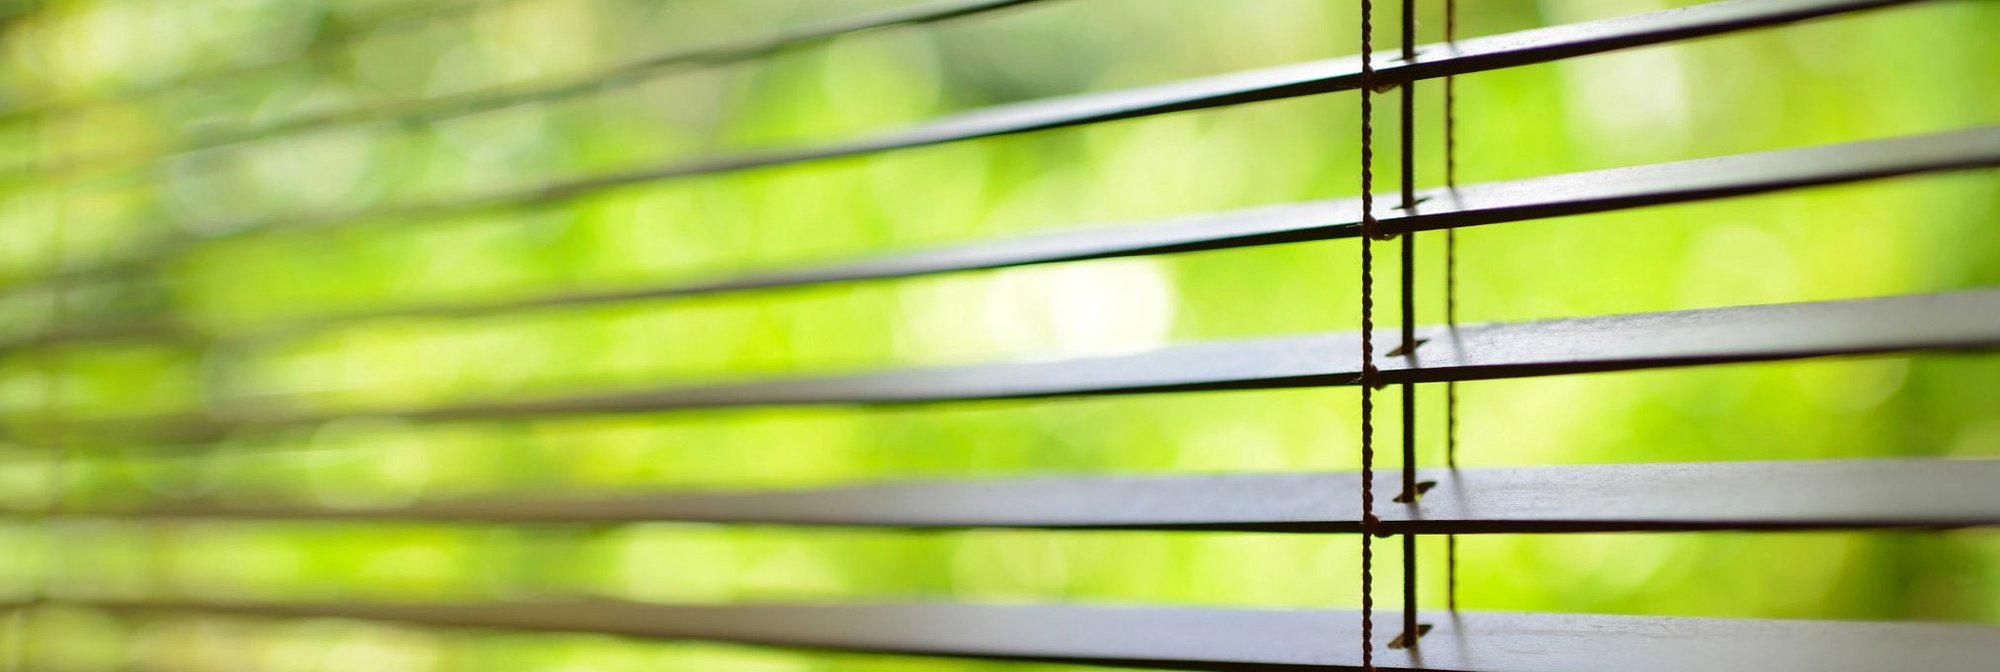 window blinds - Home Design of Hastings in MN